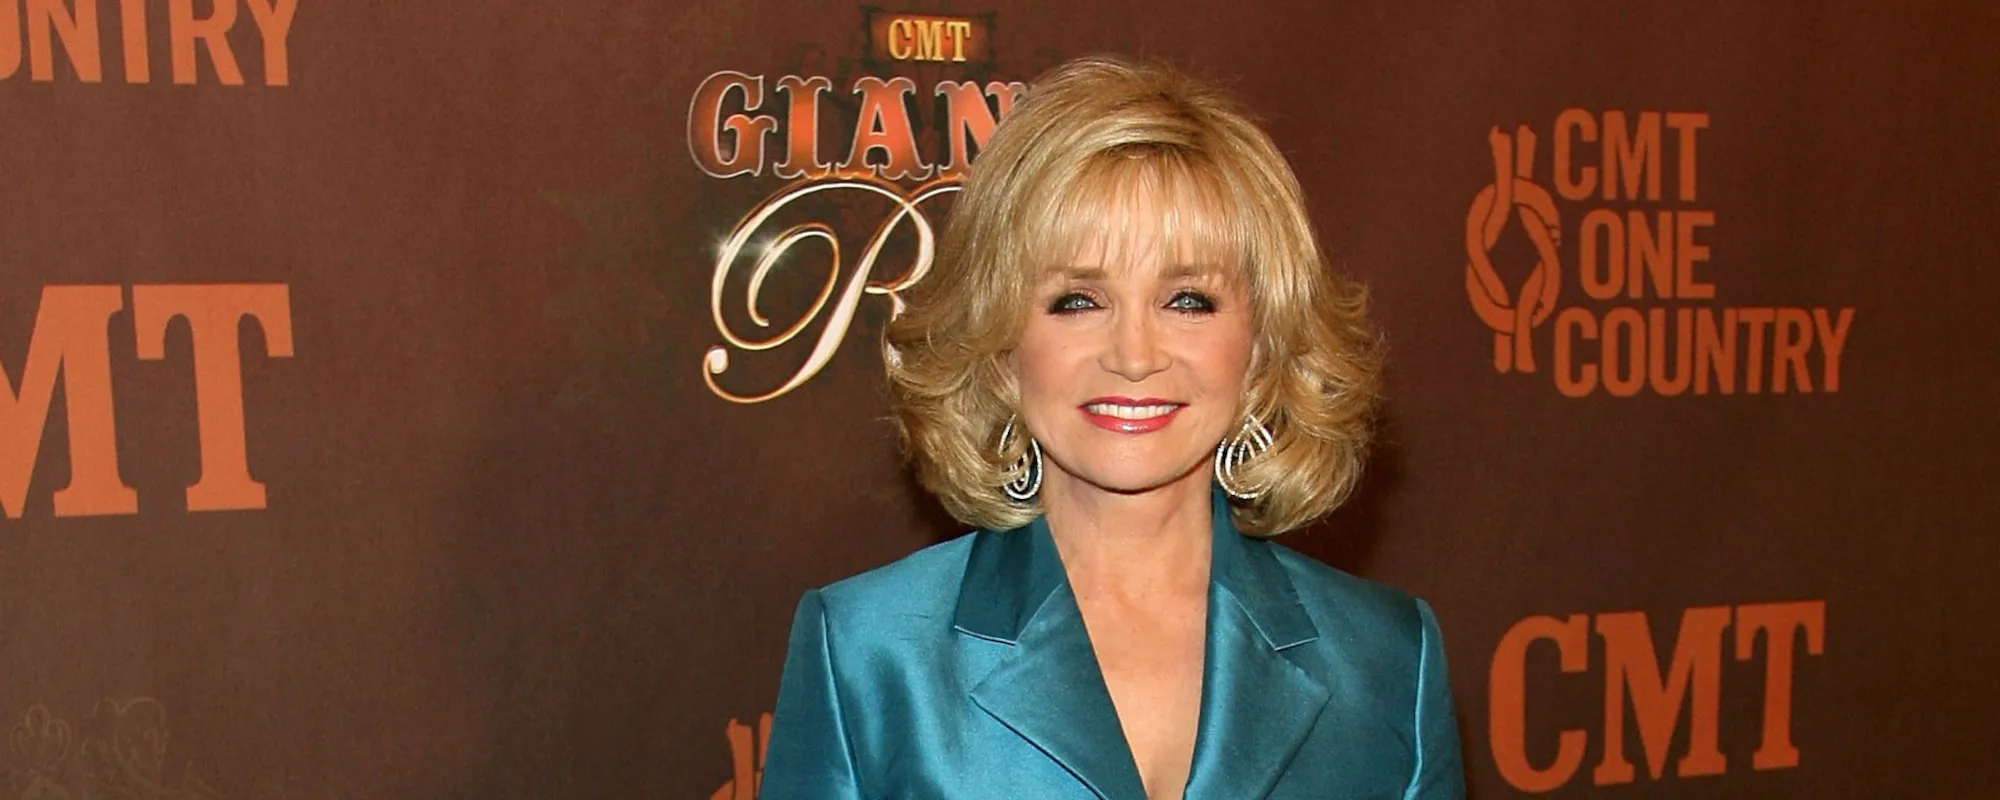 3 Songs You Didn’t Know Feature Barbara Mandrell